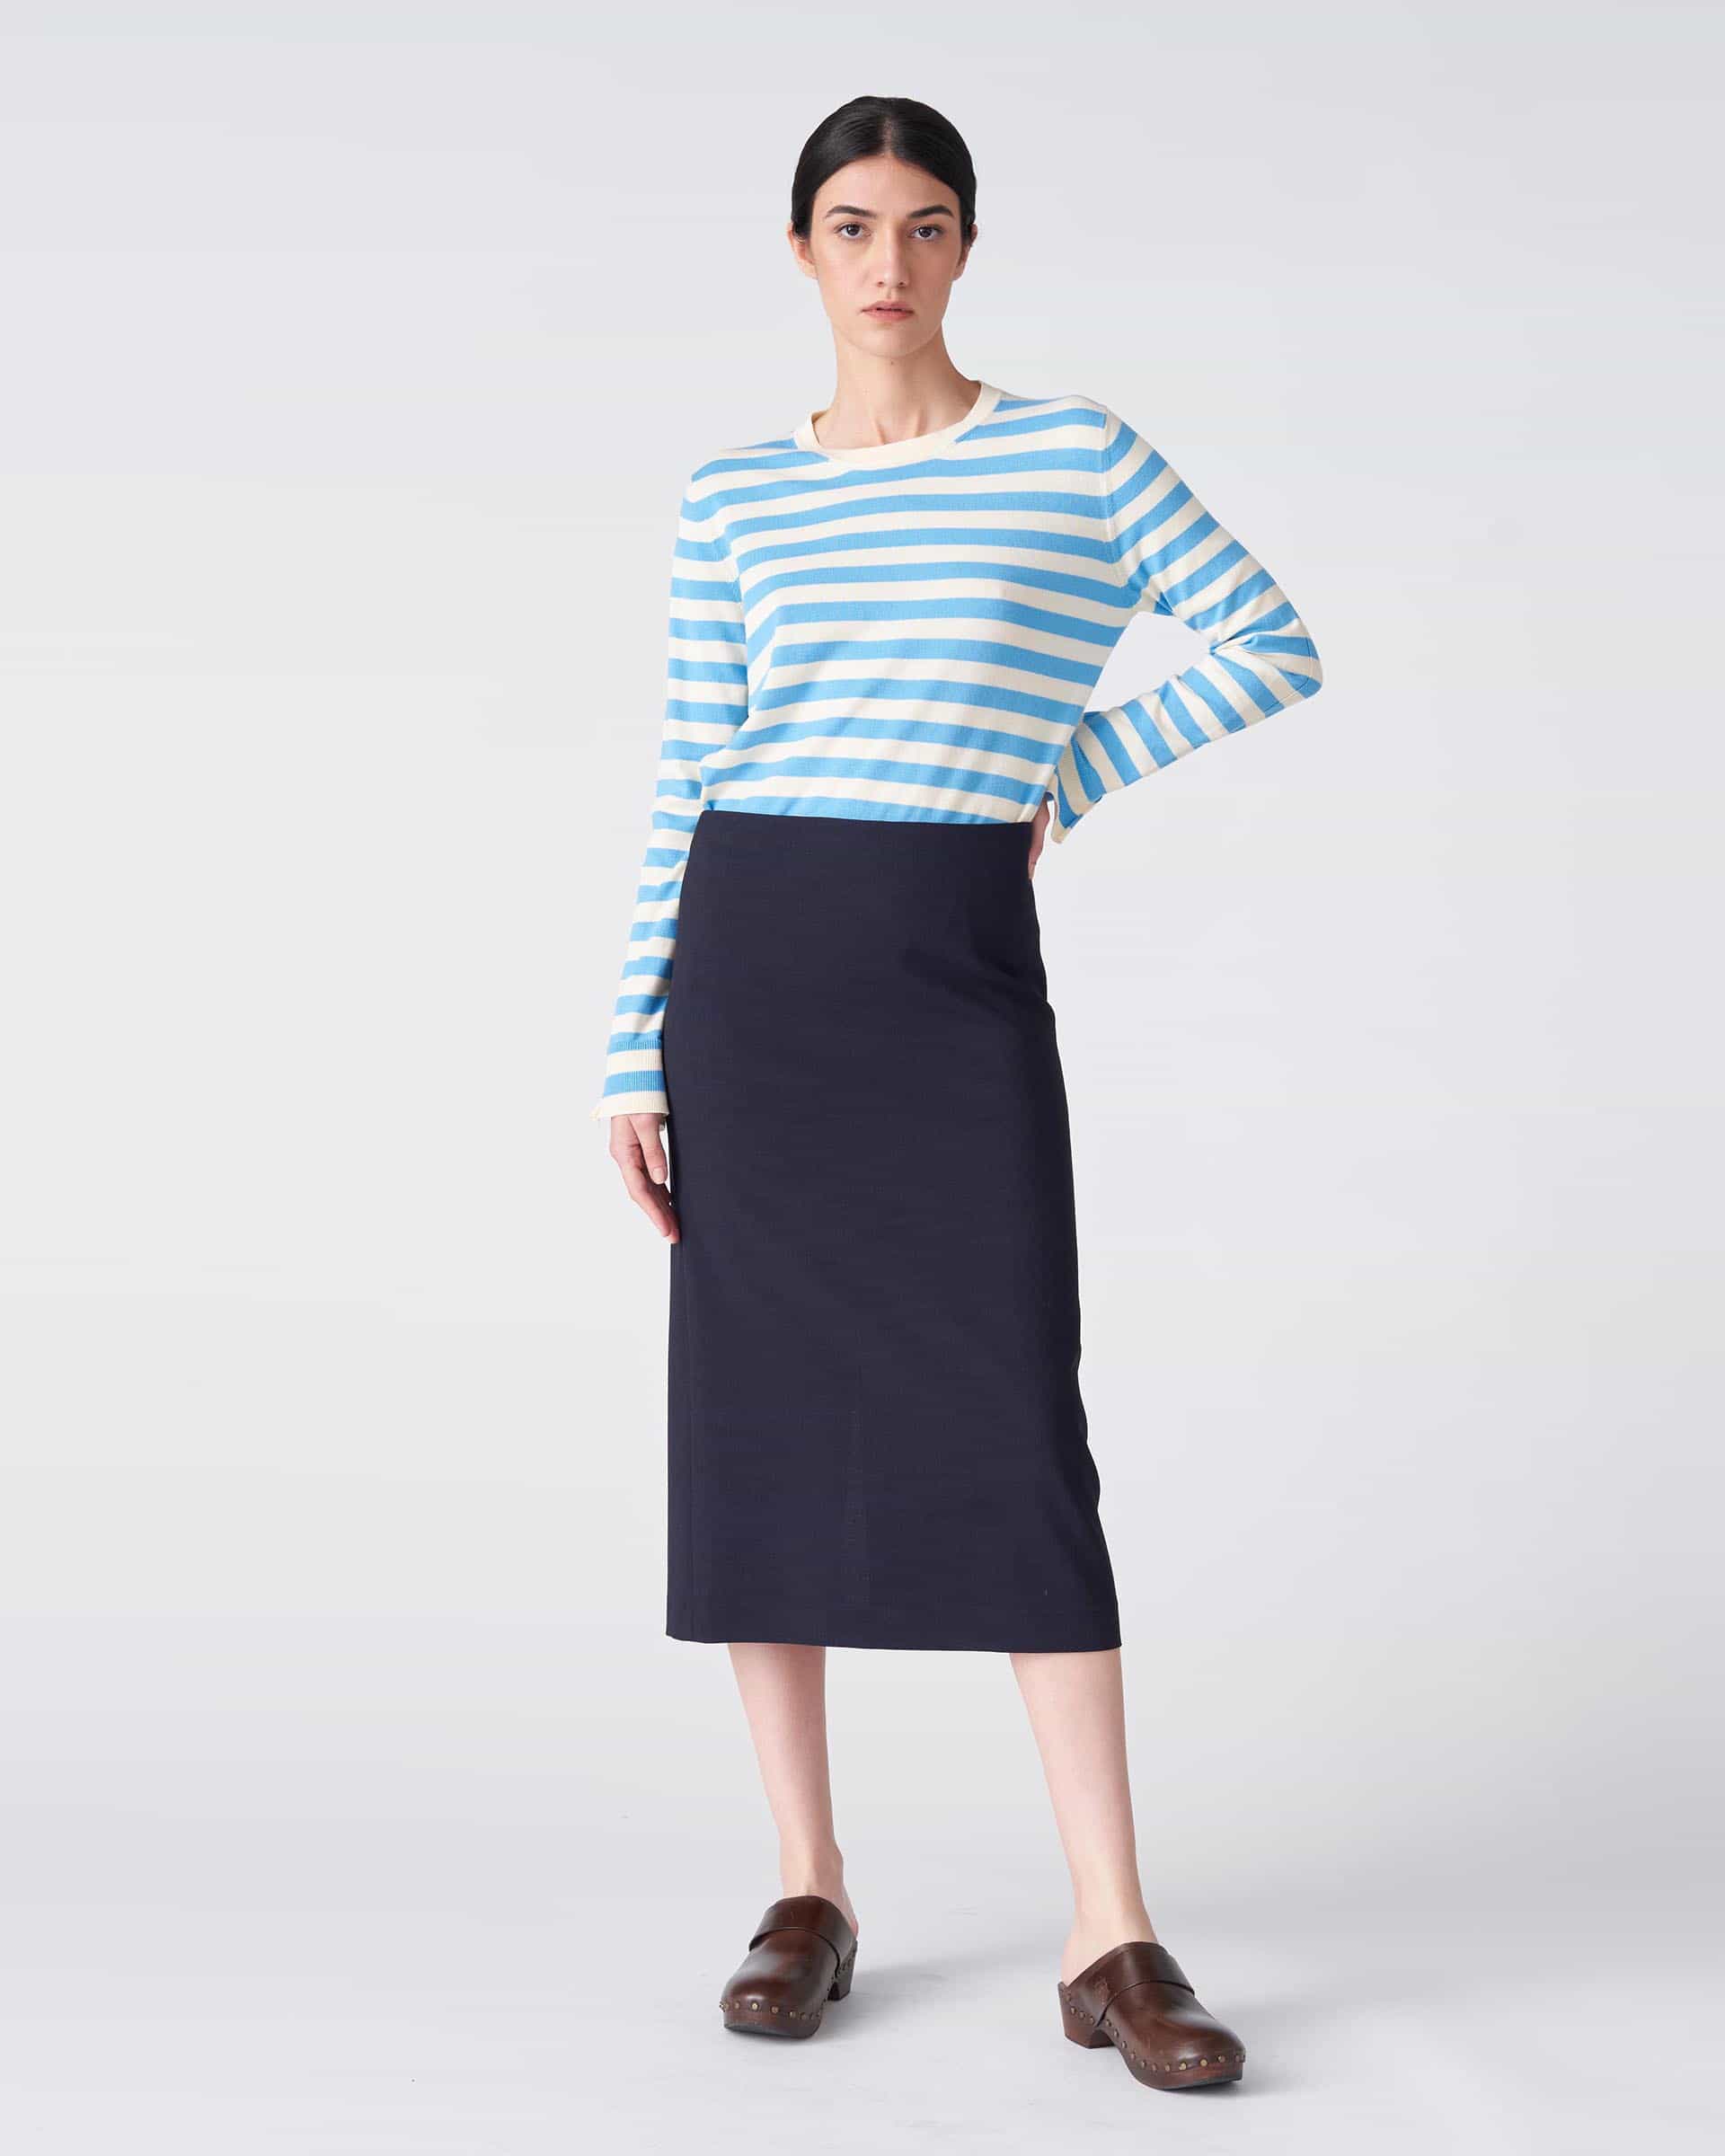 The Market Store | Pencil Skirt